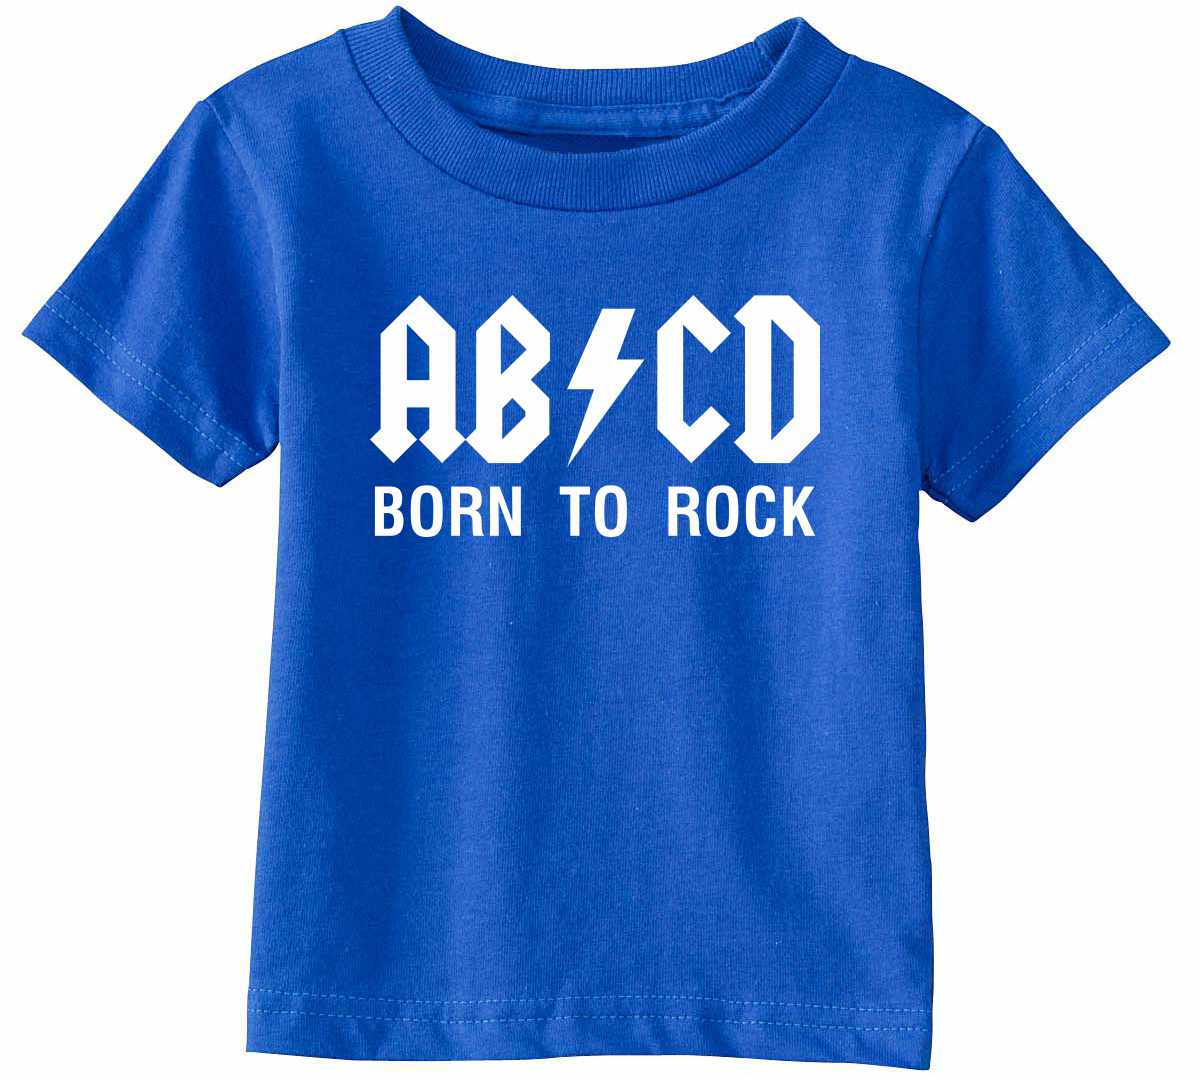 ABCD Born To Rock on Infant-Toddler T-Shirt